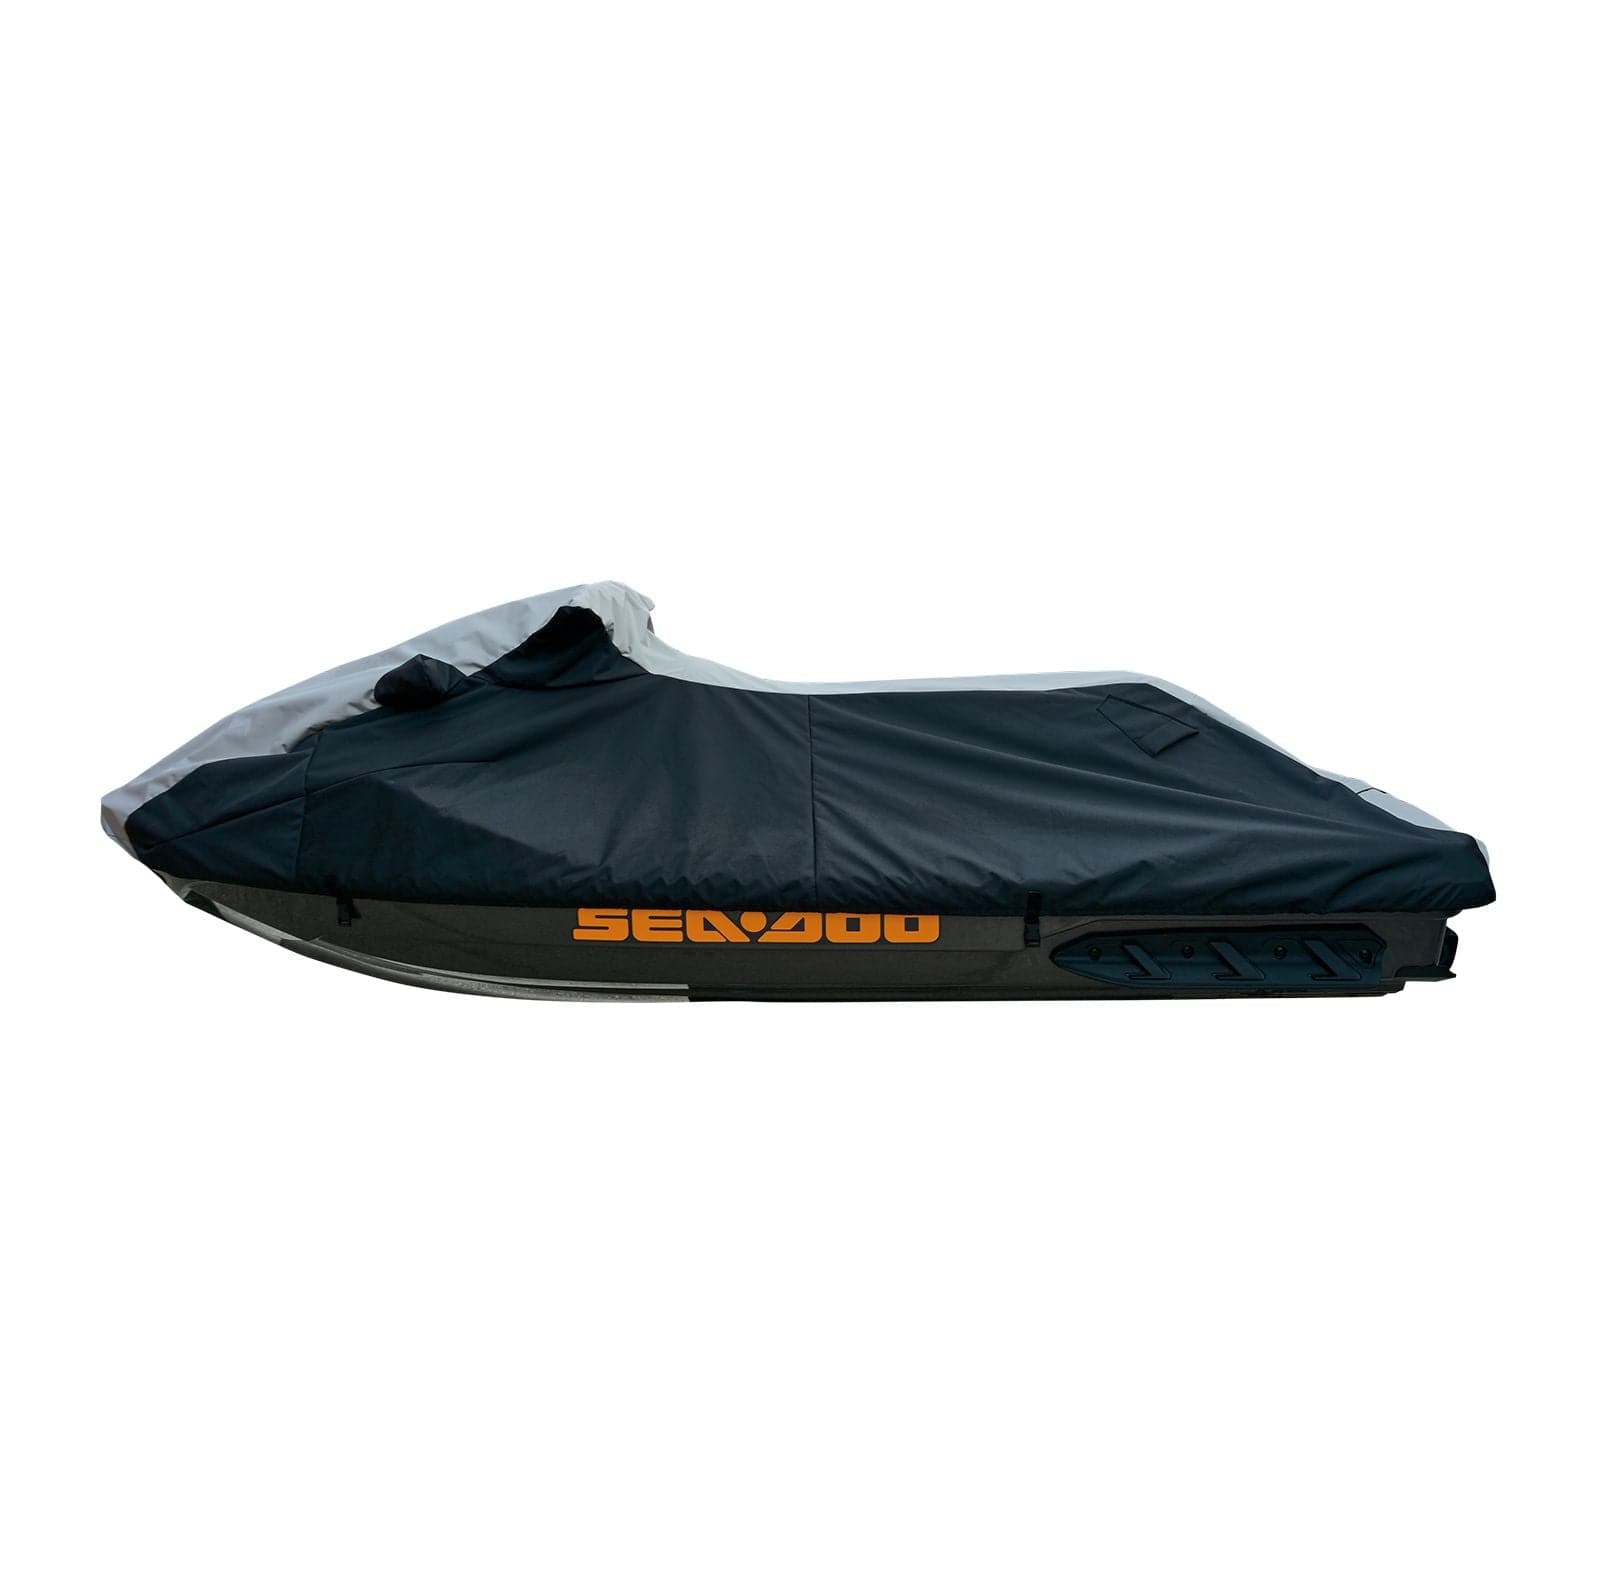 Trailerable Storage cover with vents for Sea-Doo 2011-2013 GTI, GTS, 2012 GTR